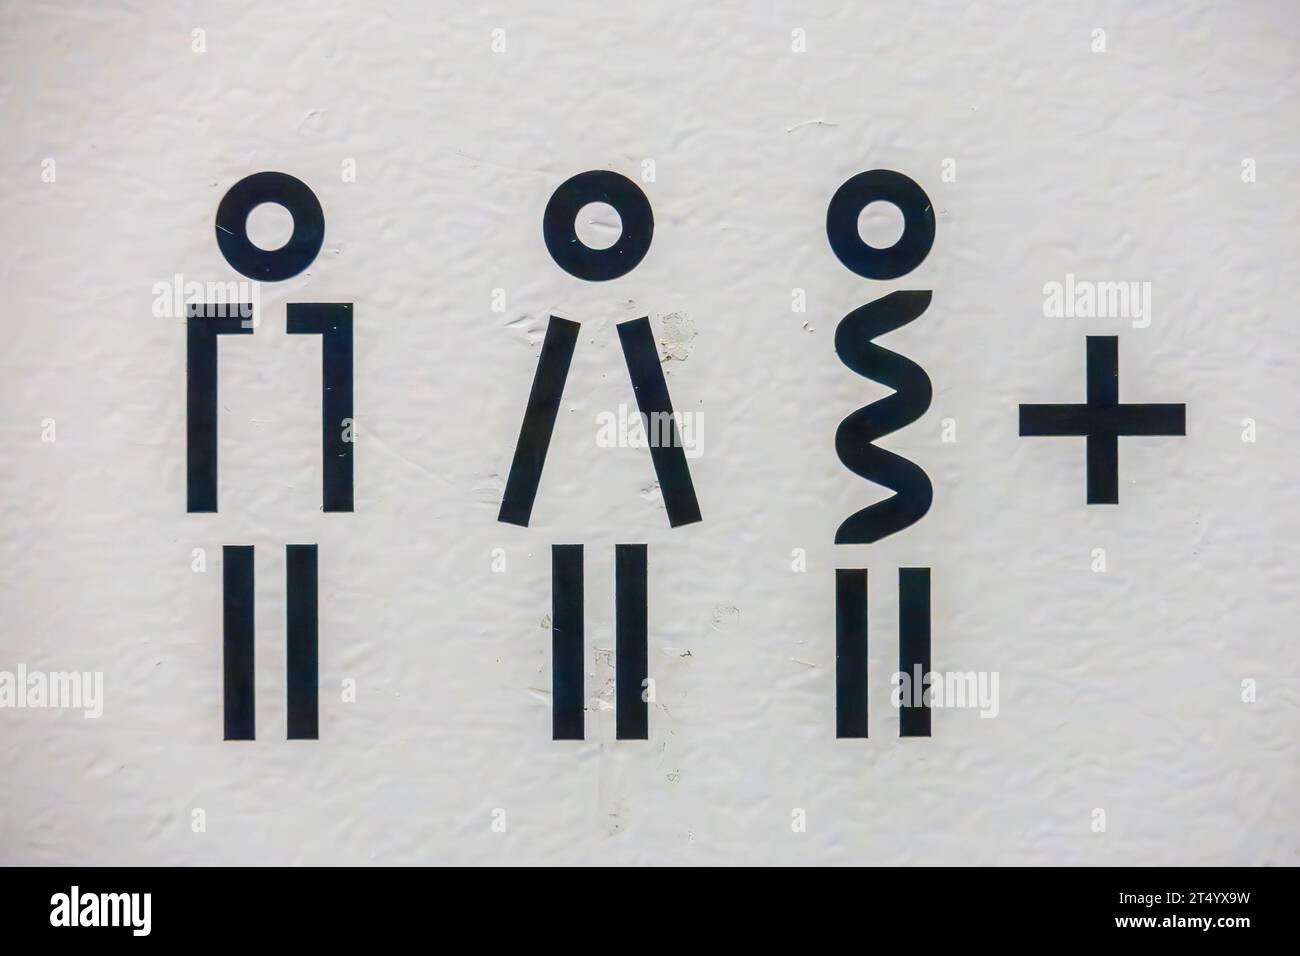 Sign seen in London, England displaying toilets for all genders: Male, female, LGBT, or LGBTQIA+ or even 2ELGBTQQIA+. Stock Photo